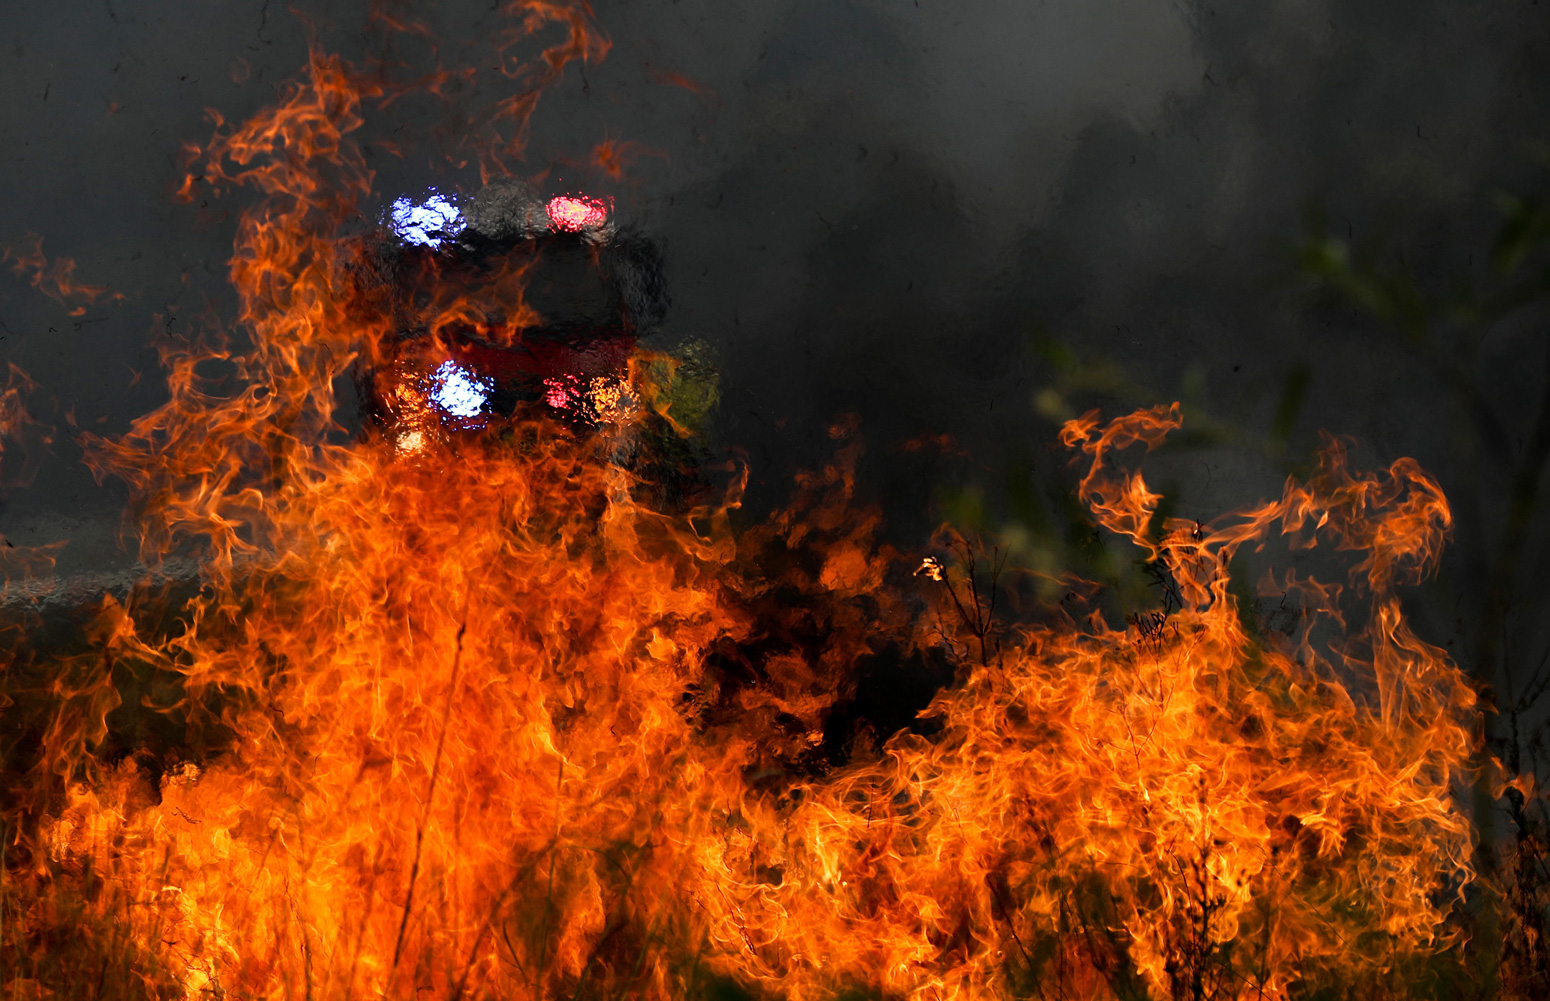 Firefighters battle the flames during bushfires near Taree, New South Wales, Australia (Nov. 11, 2019).